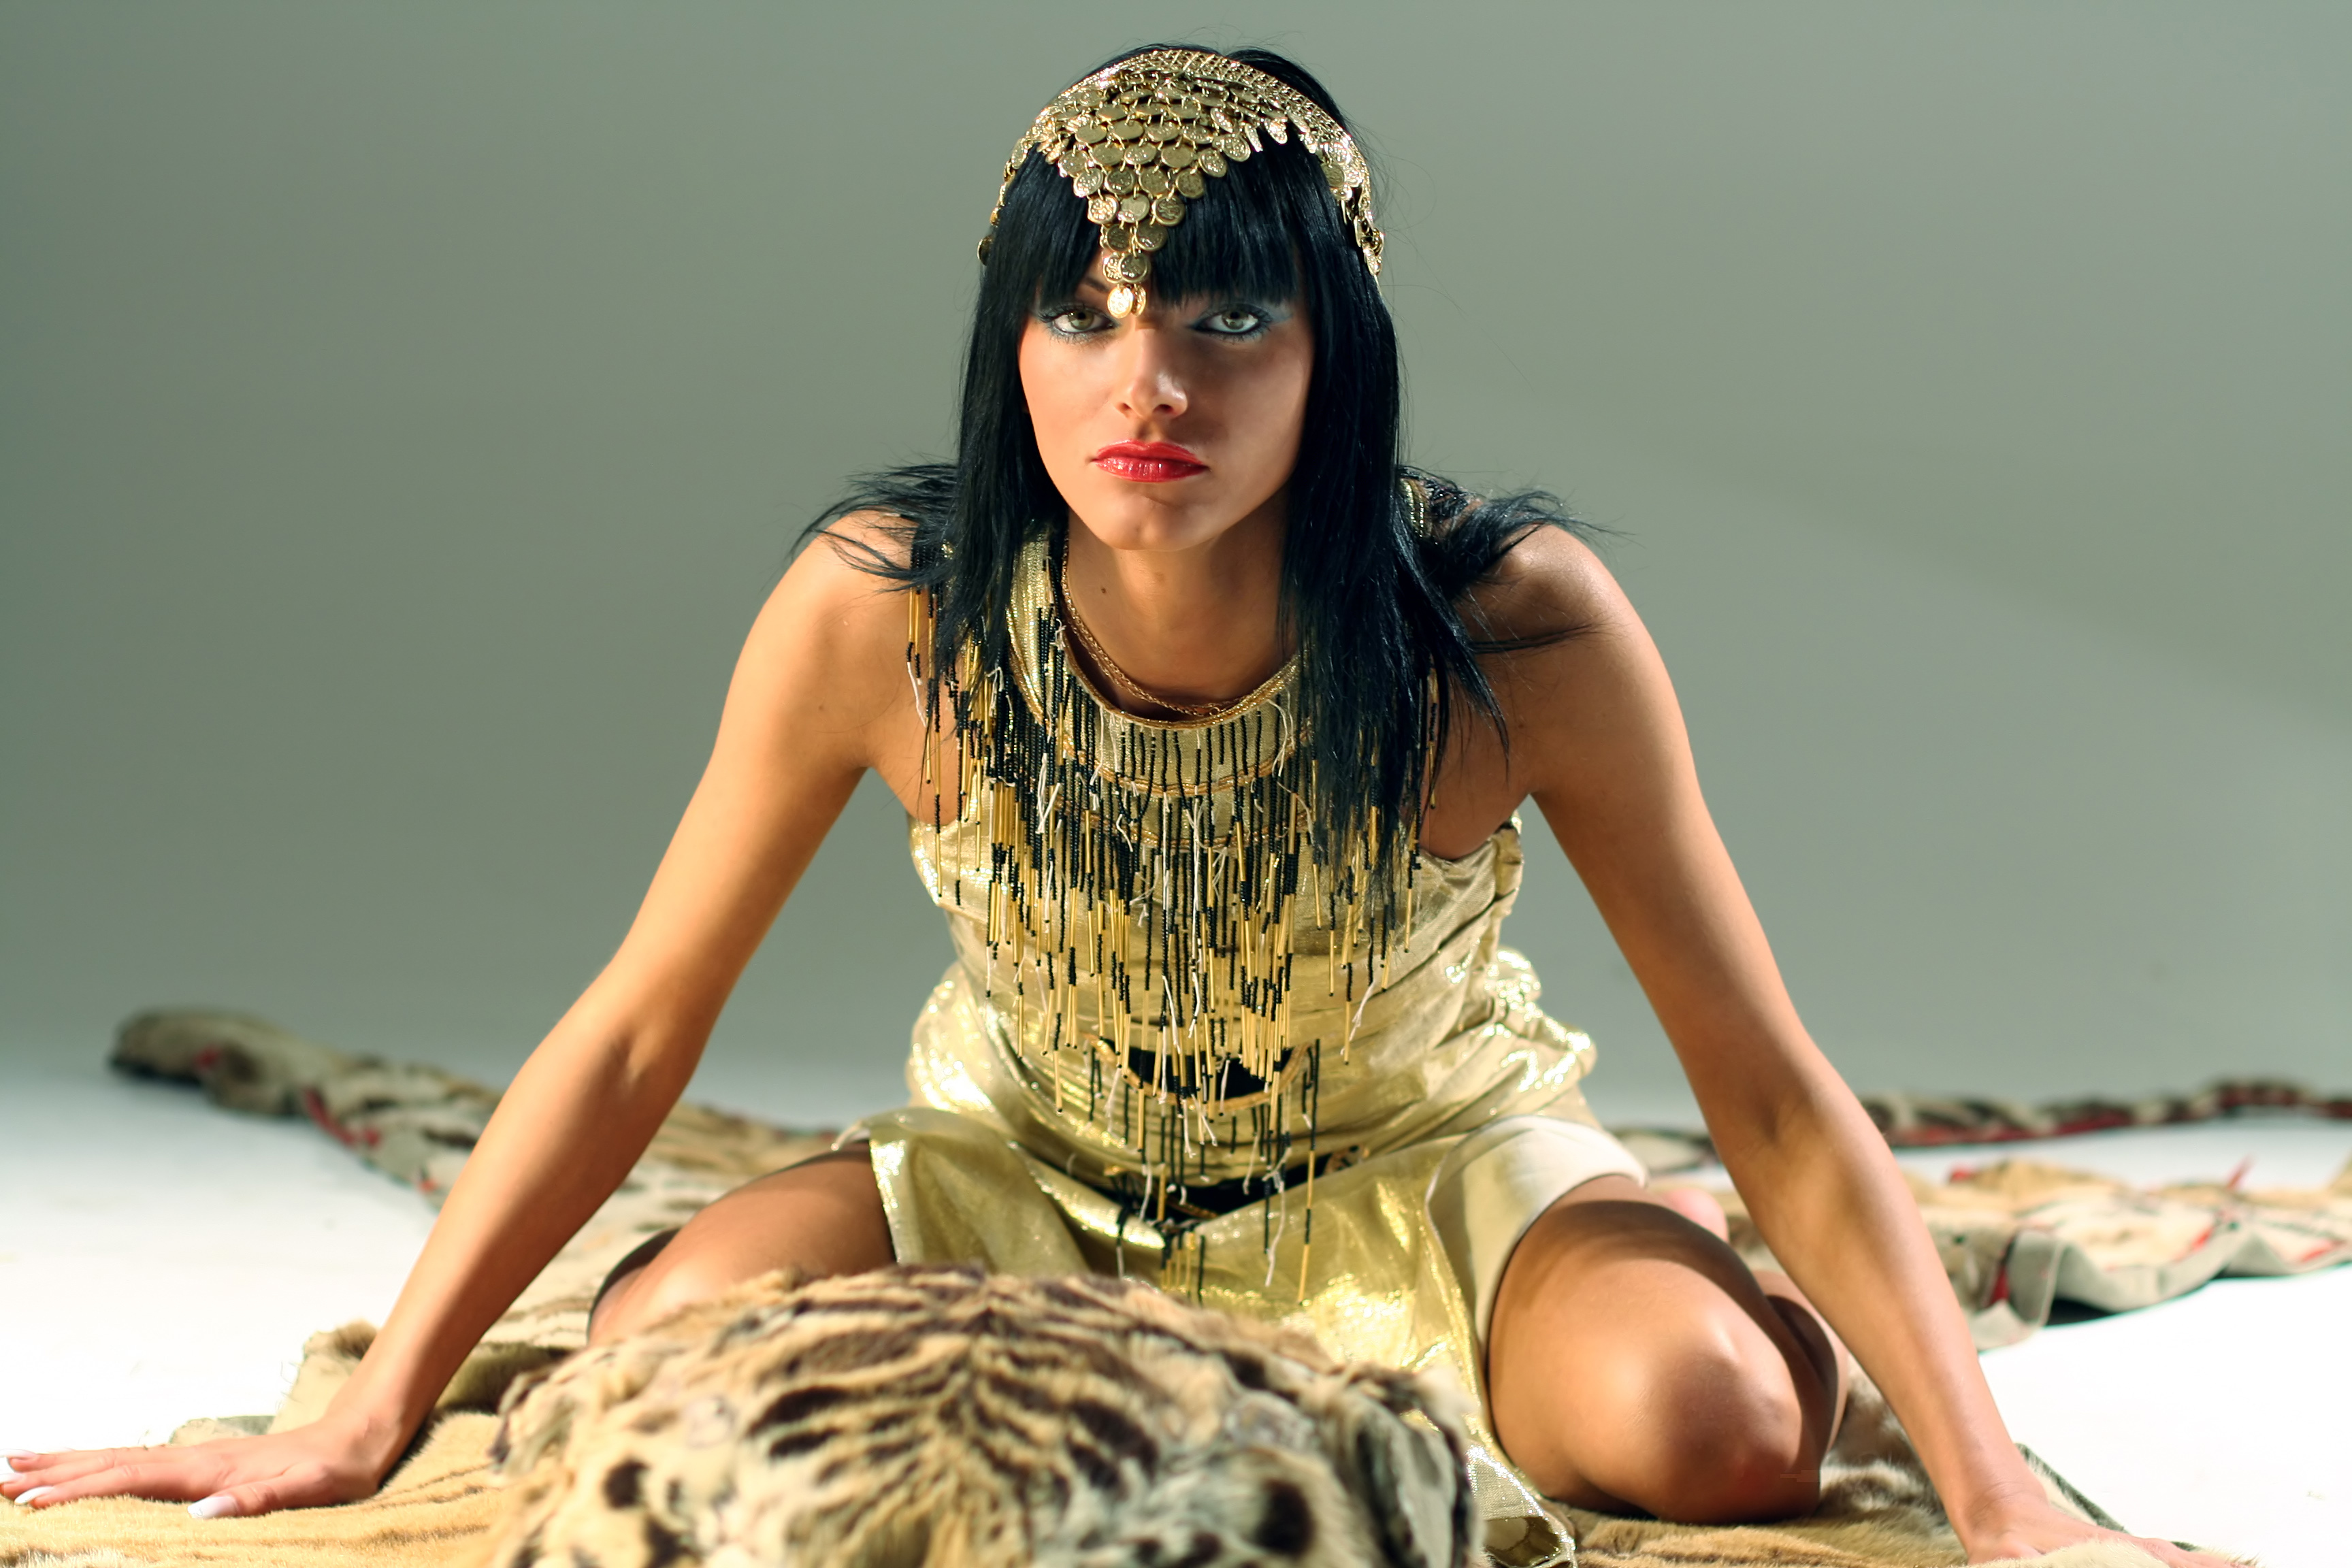 From Cleopatra to Peter Pan; The Loss of Female and Male Qualities